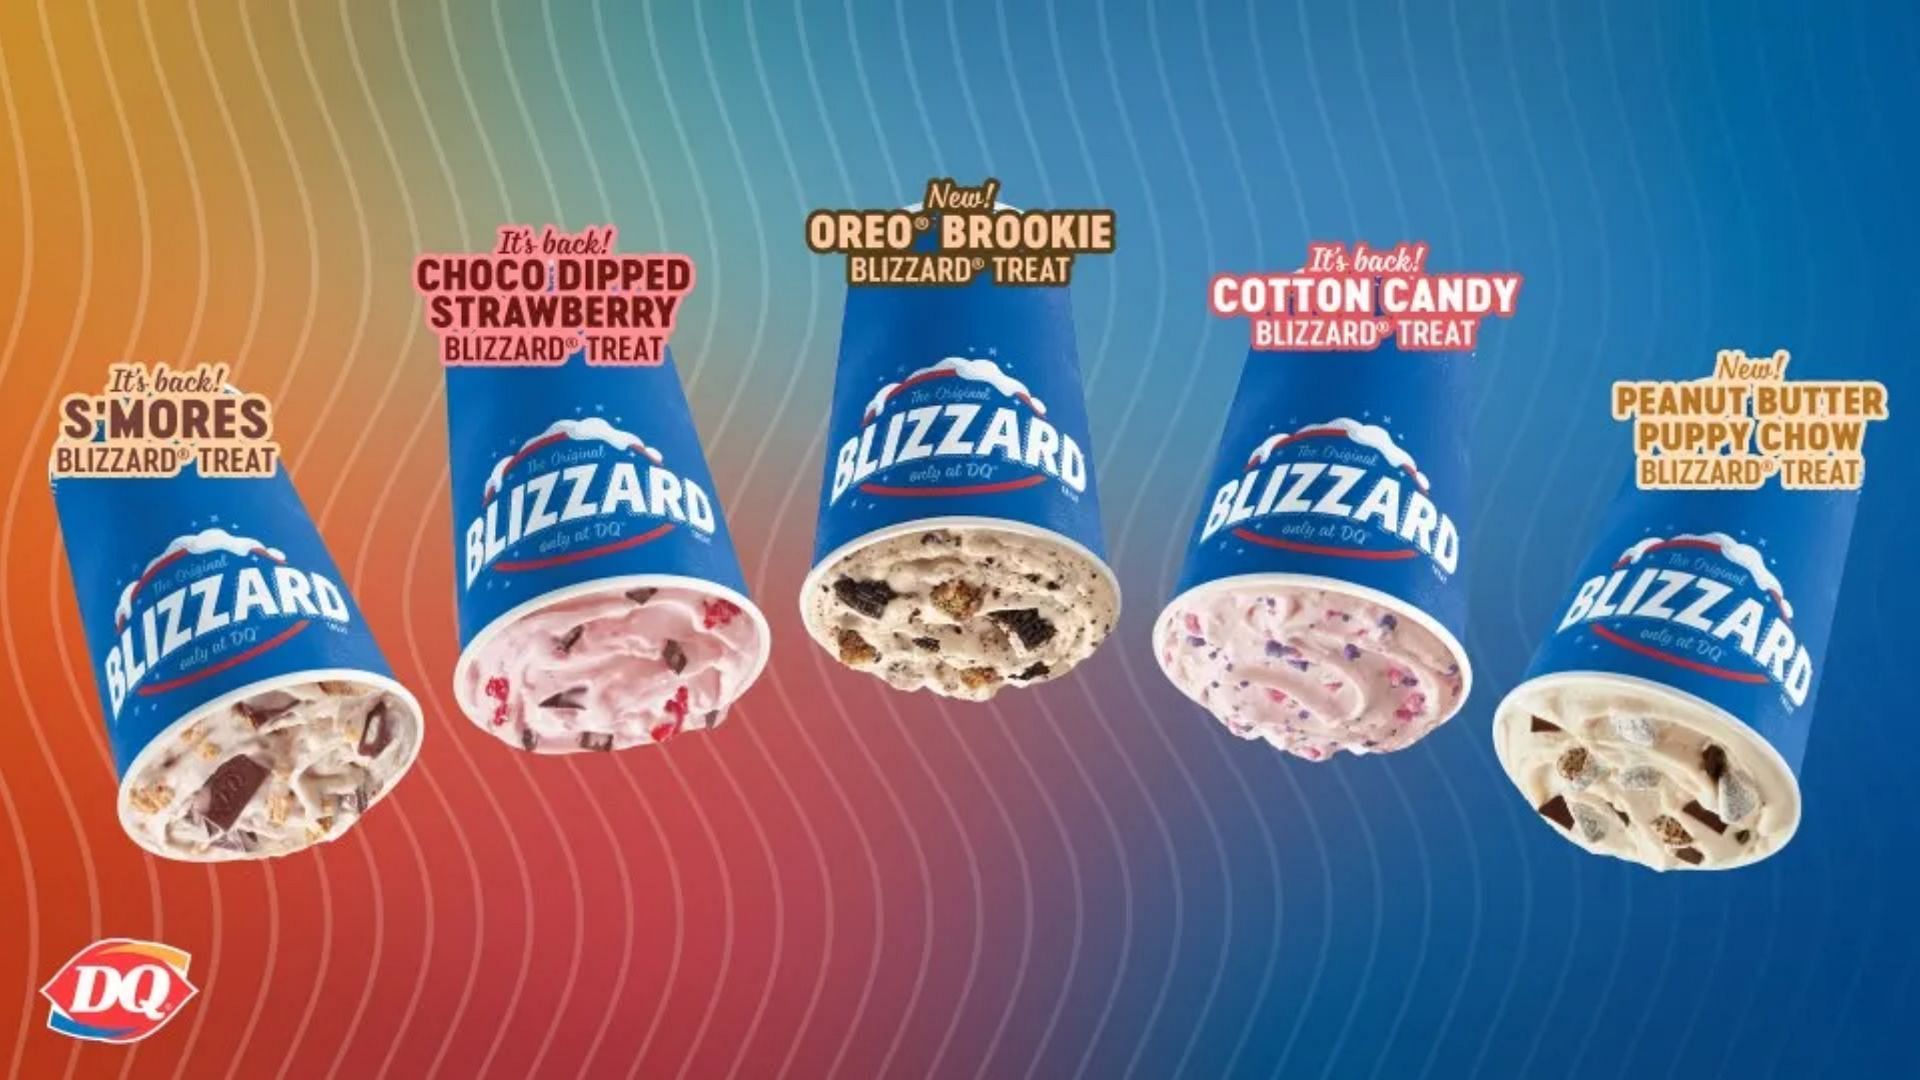 Dairy Queen unveils new limited-time 85-cent Blizzard deal in honor of the 1985 debut of the soft serve treat (Image via Dairy Queen)